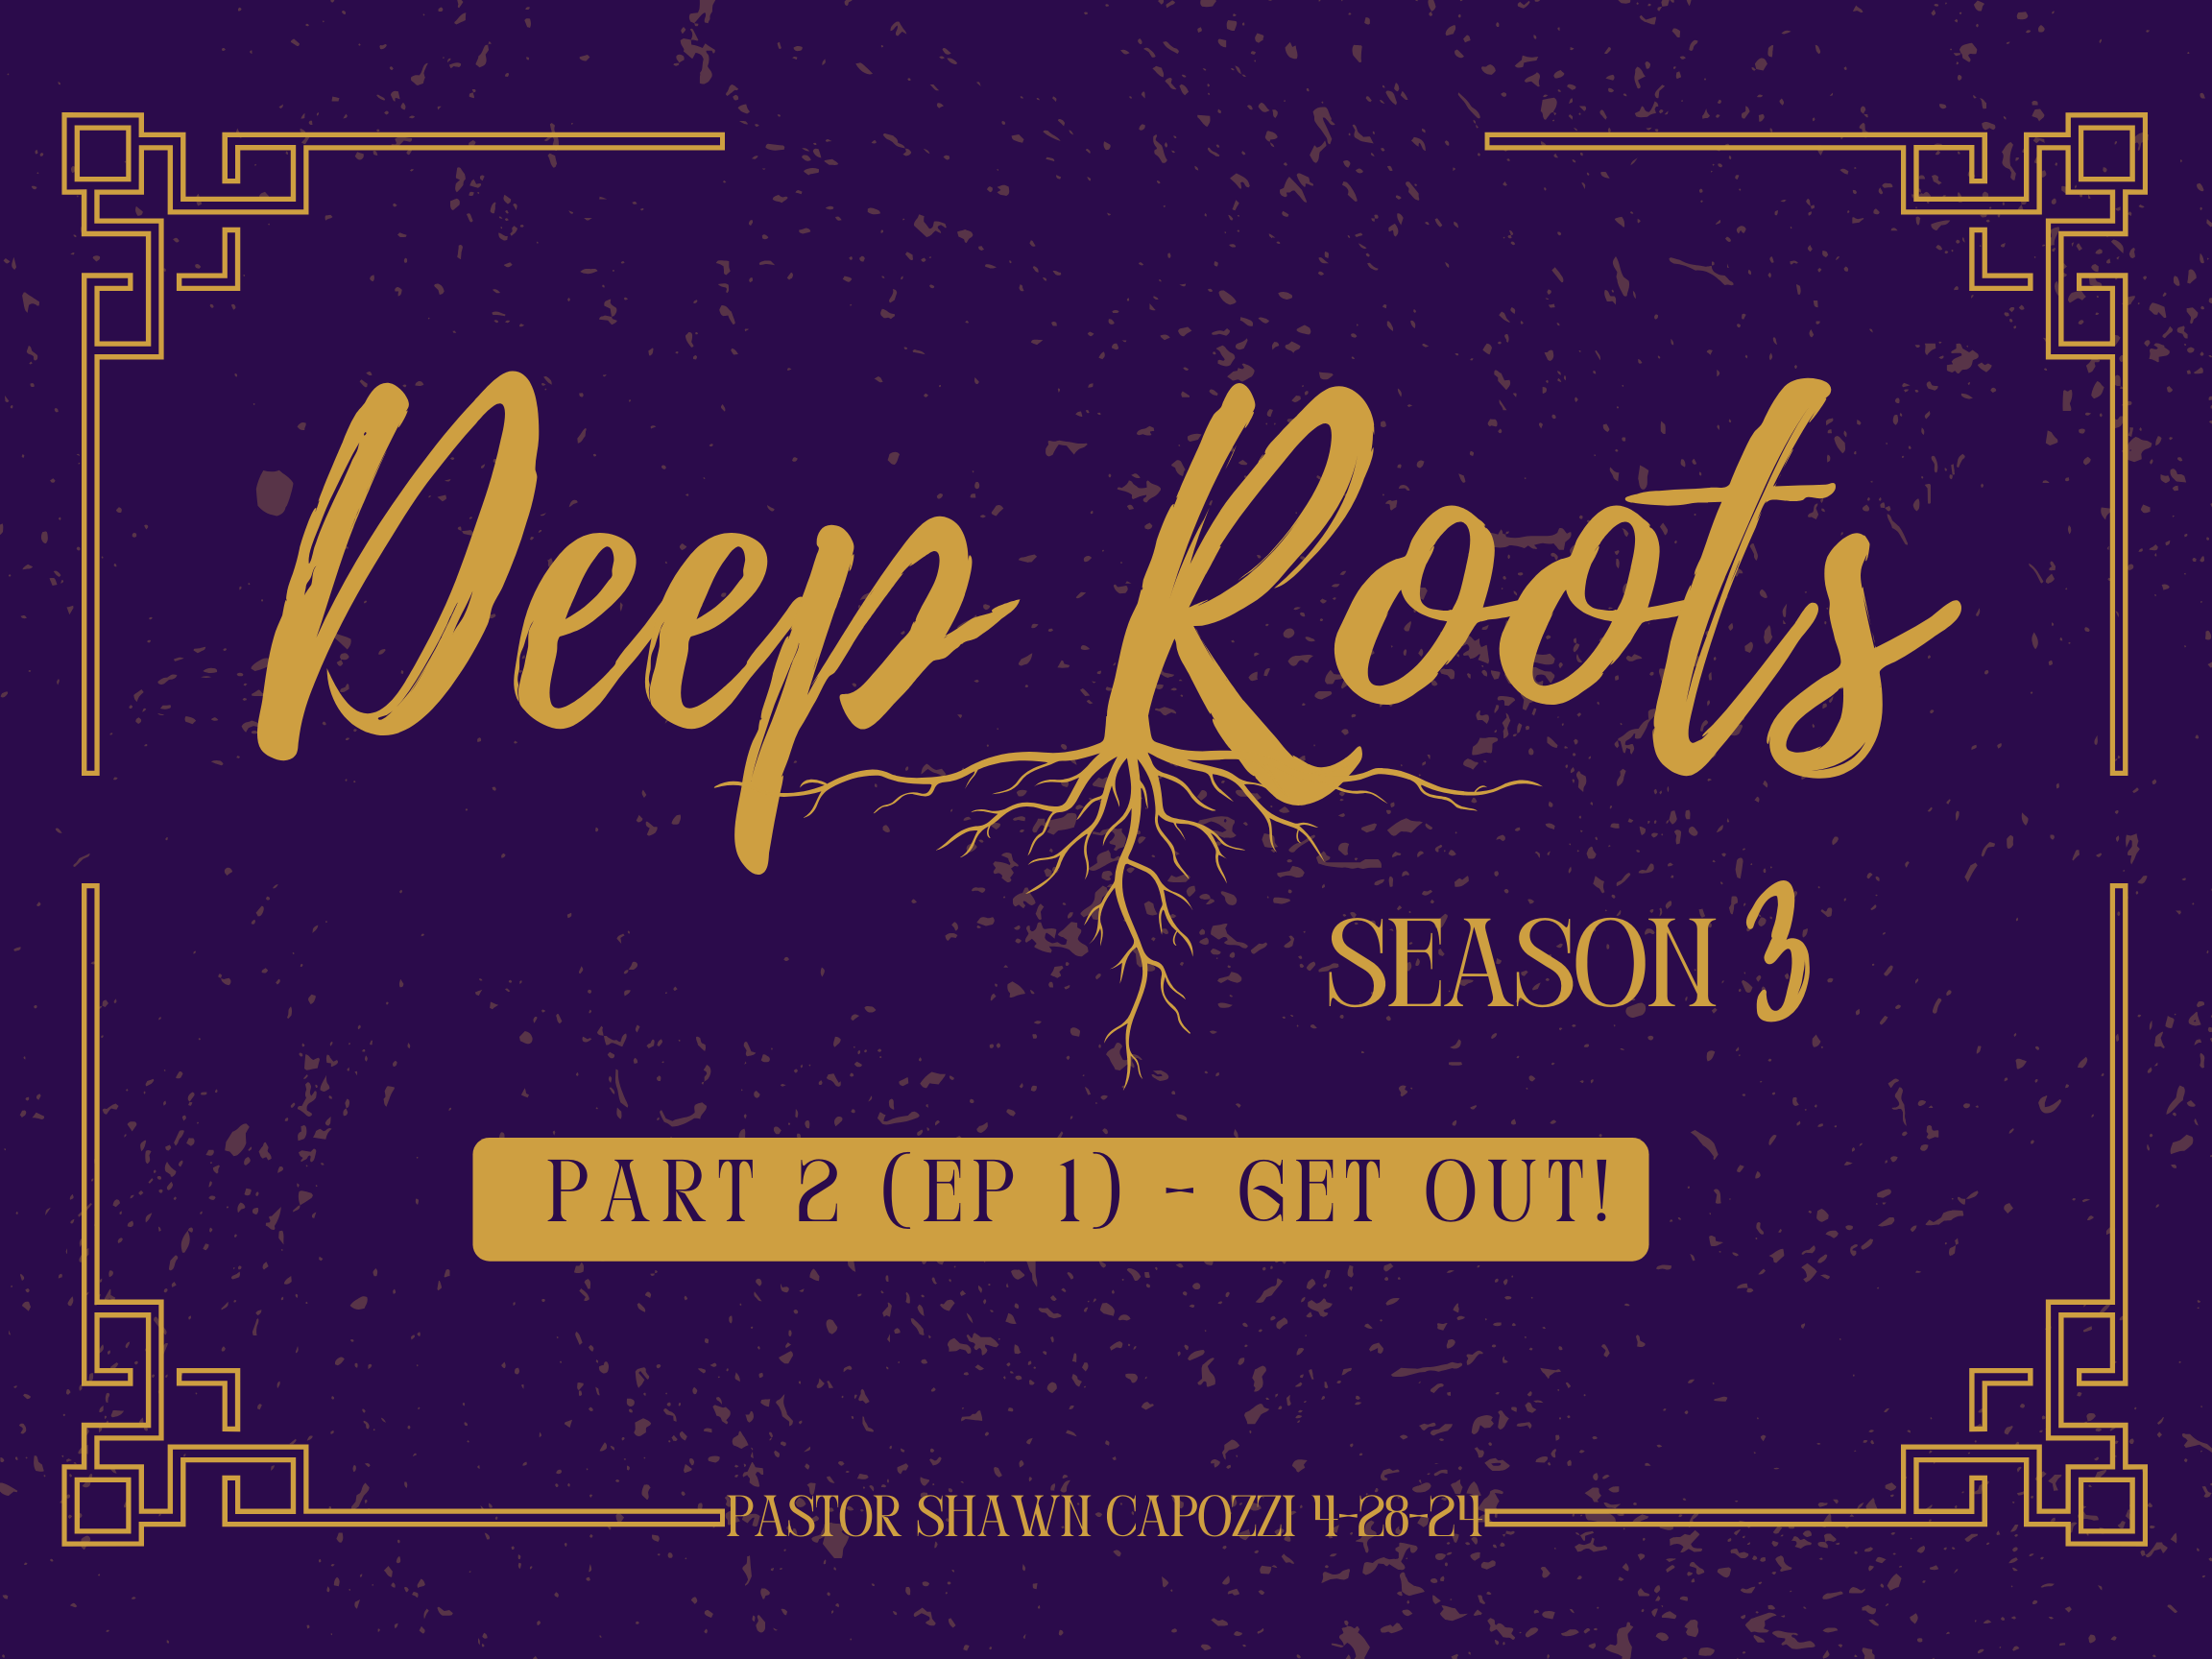 Deep Roots S3E1 Get Out!